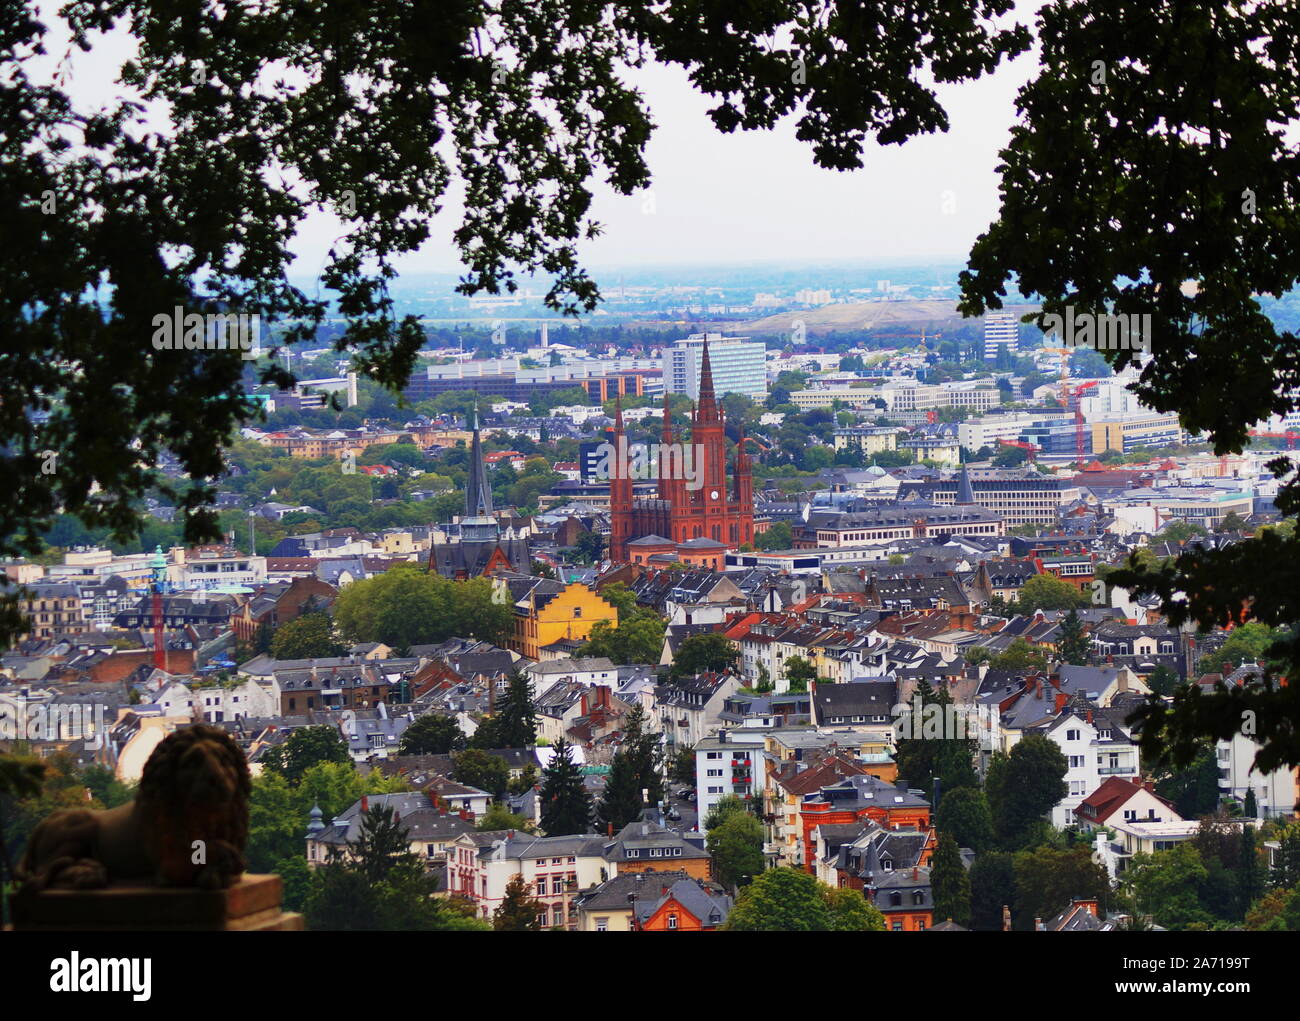 A beautiful view from the Neroberg on Wiesbaden the capitol city of Hessen in Germany Stock Photo